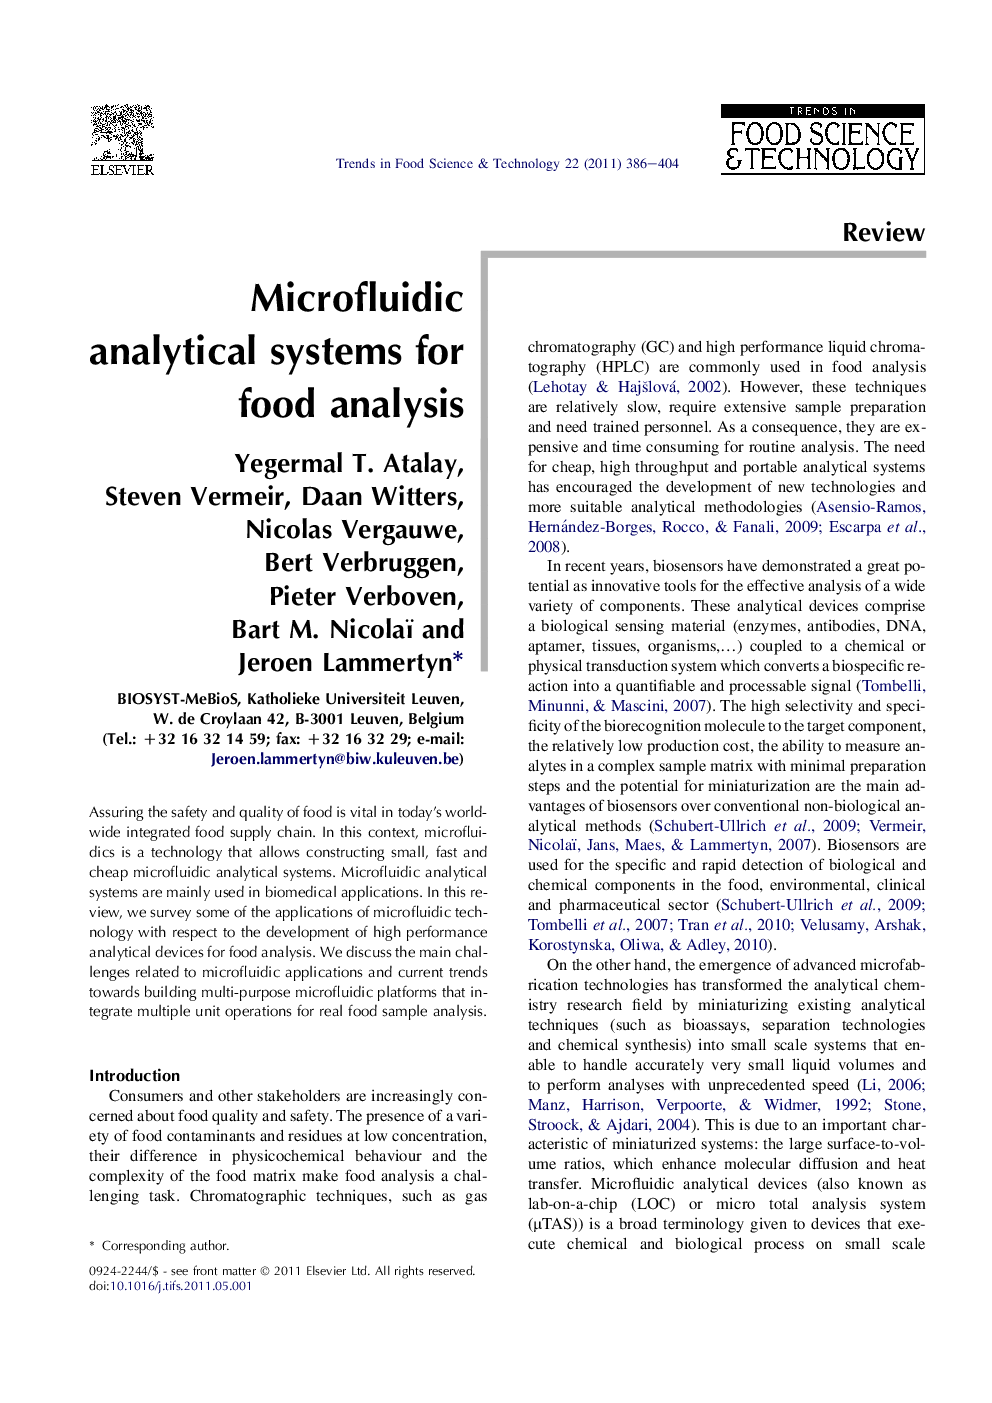 Microfluidic analytical systems for food analysis